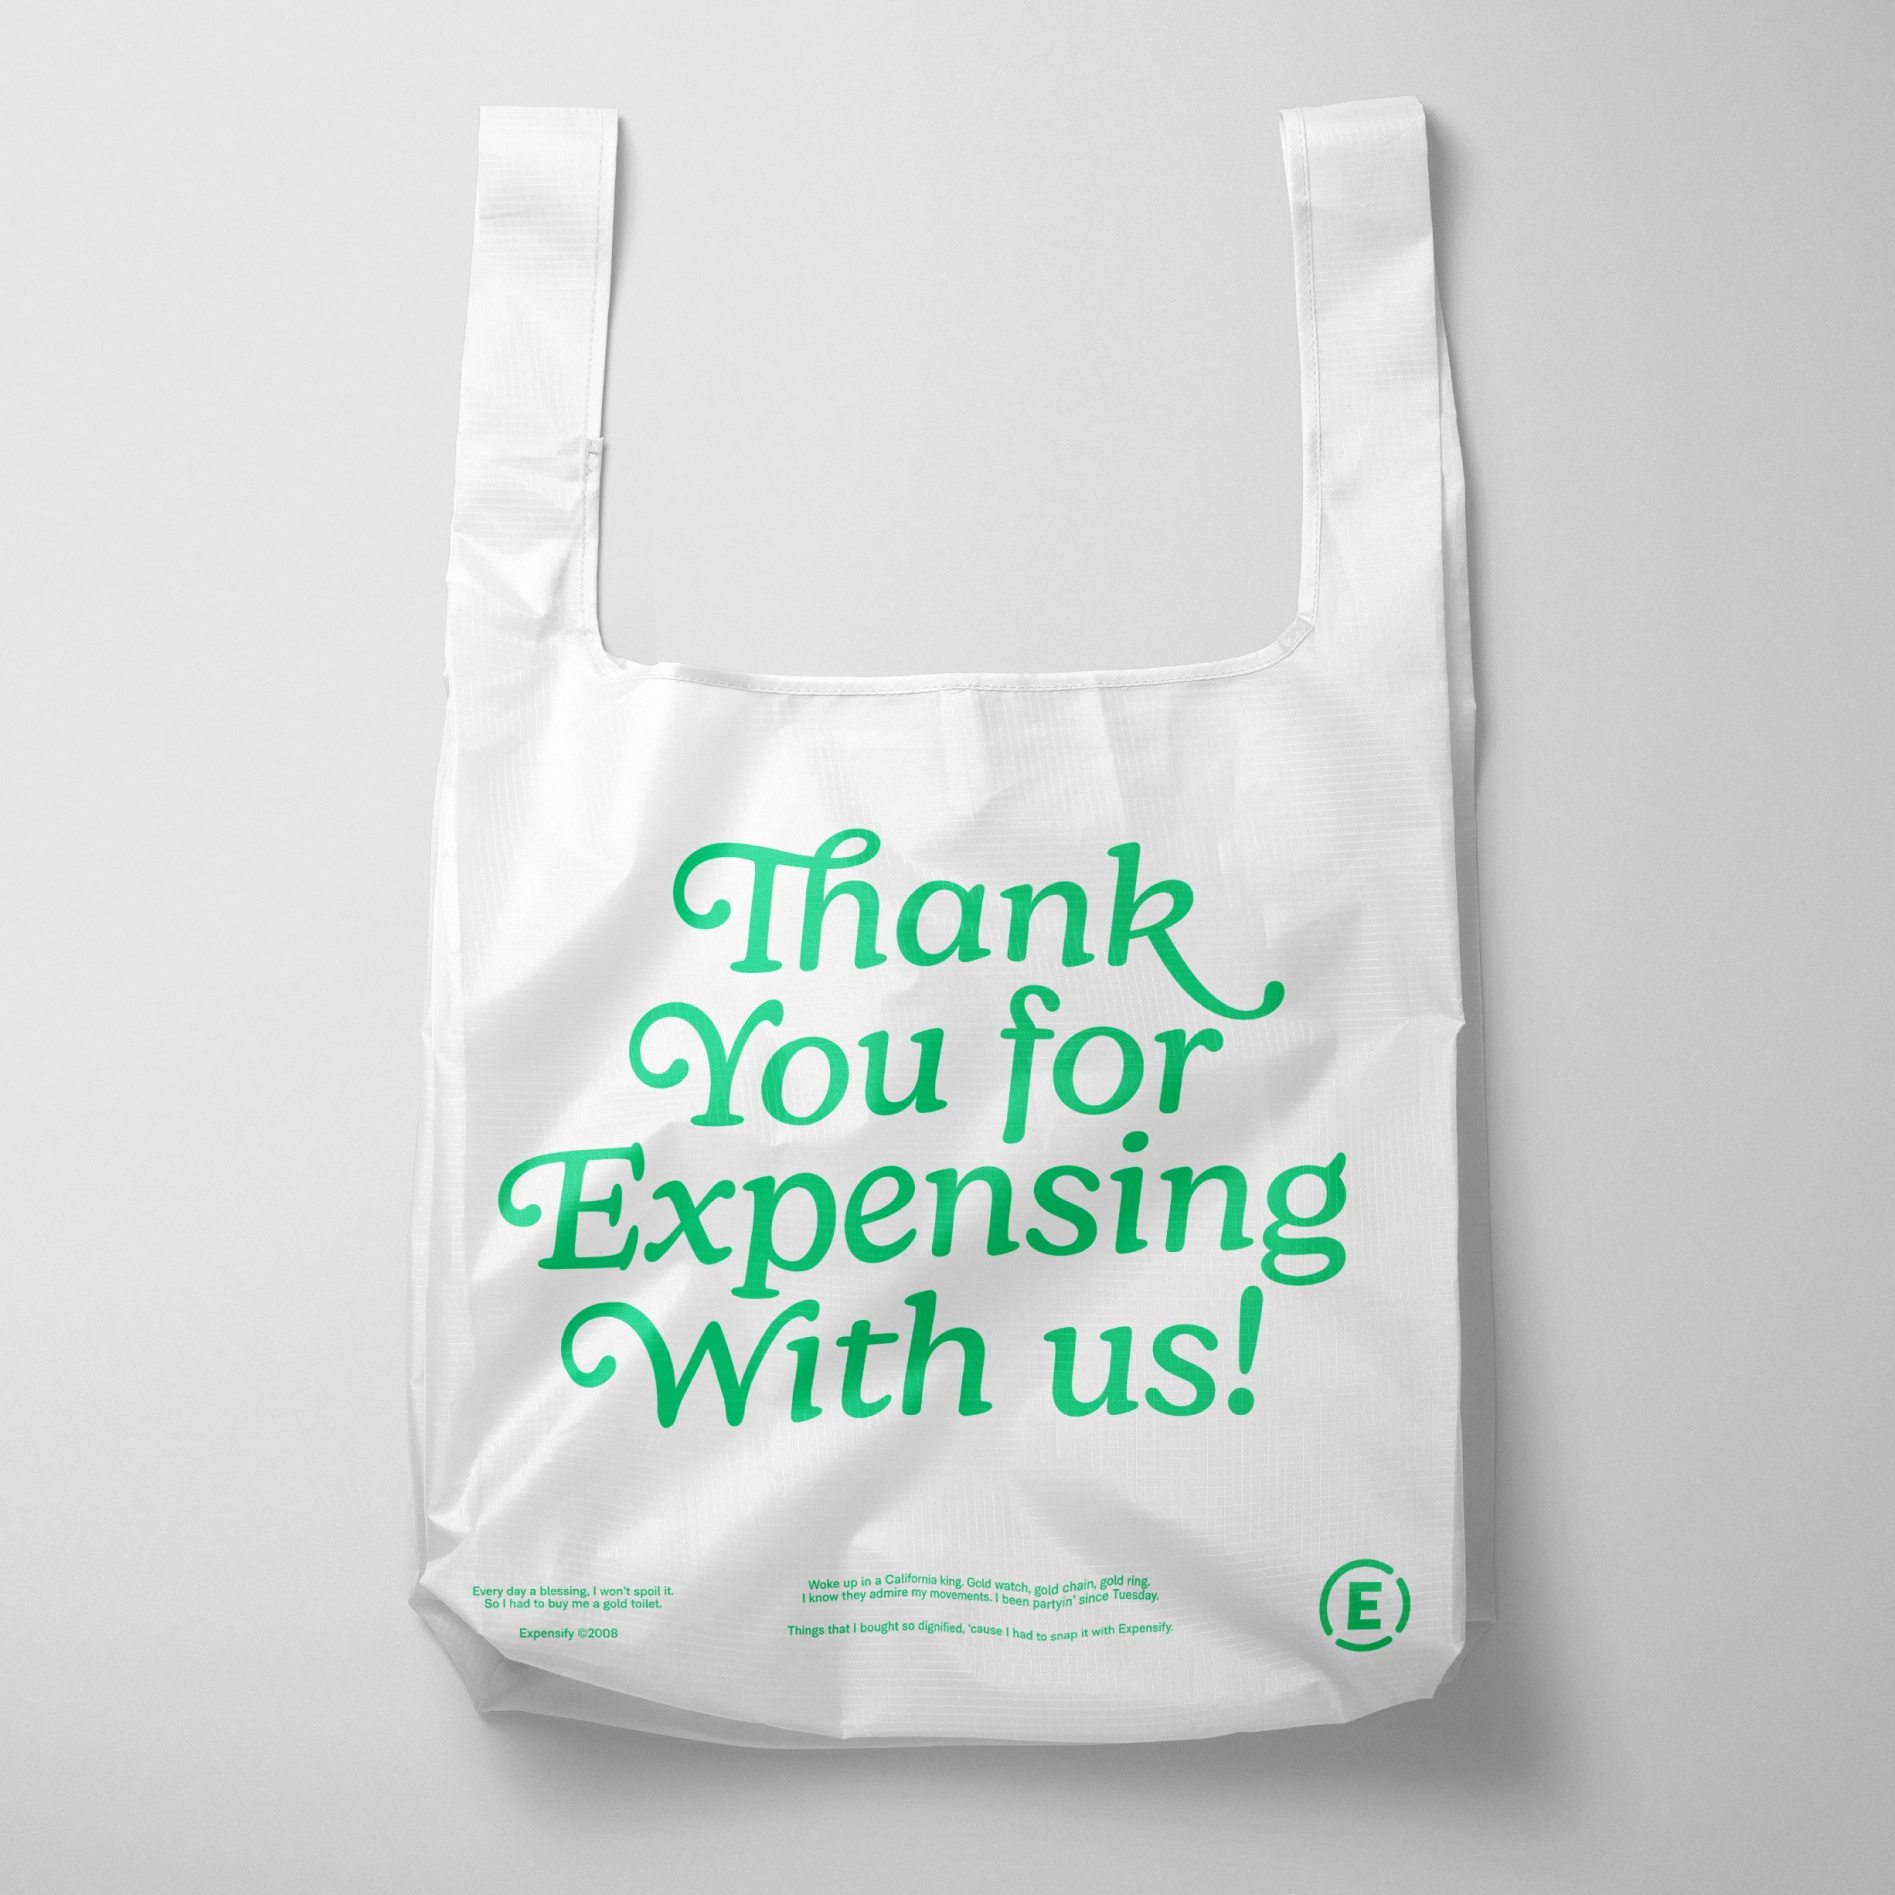 A custom Baggu bag that says "Thank you for Expensing with us"